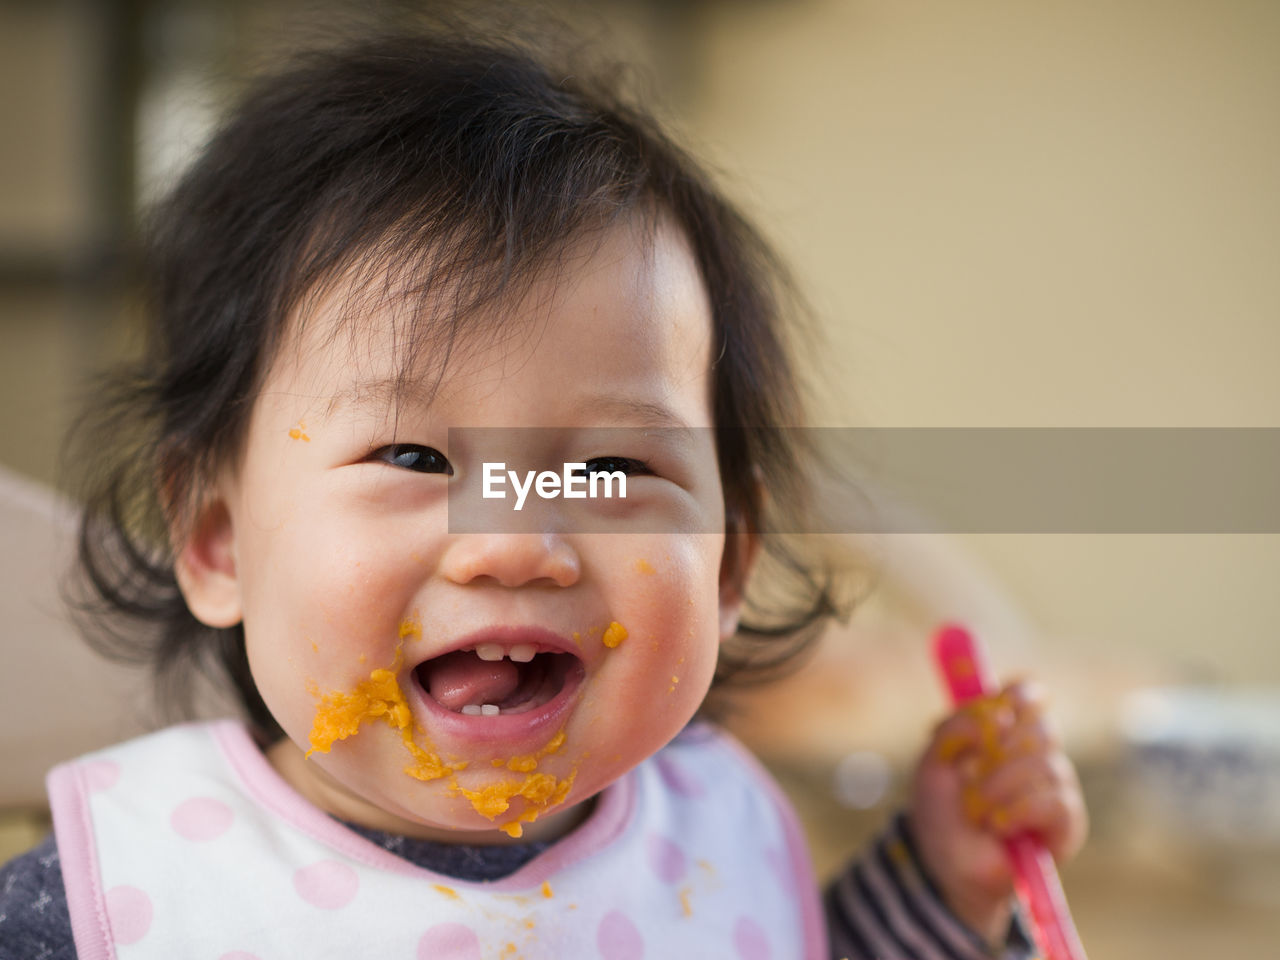 Close-up portrait of cute baby girl eating mashed potatoes at home